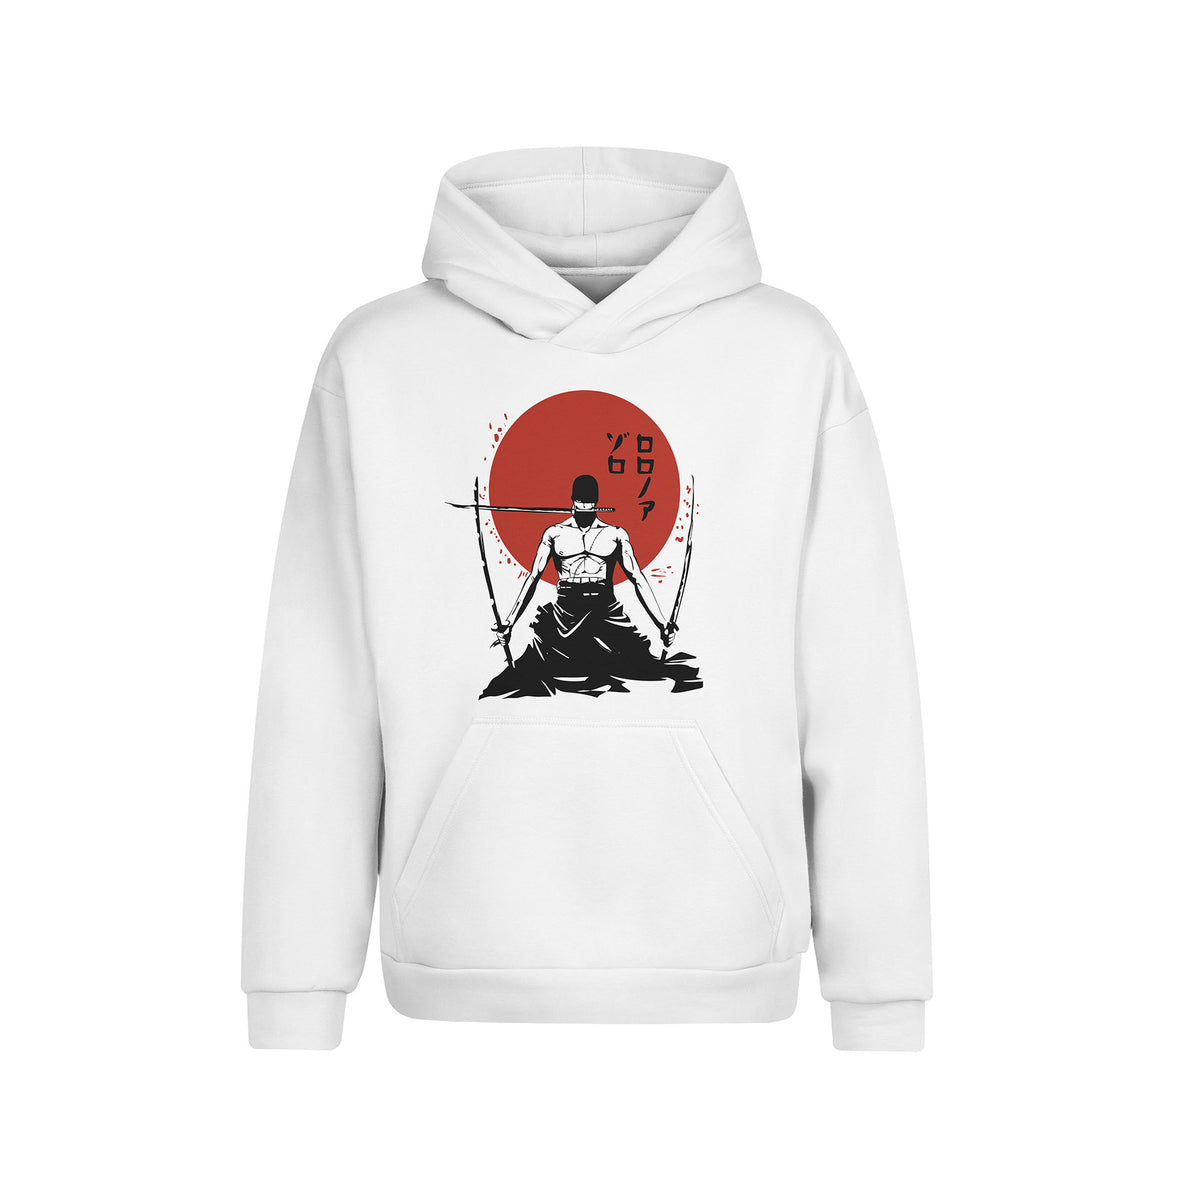 Buy One Piece Anime Hoodie Online India Fans Army